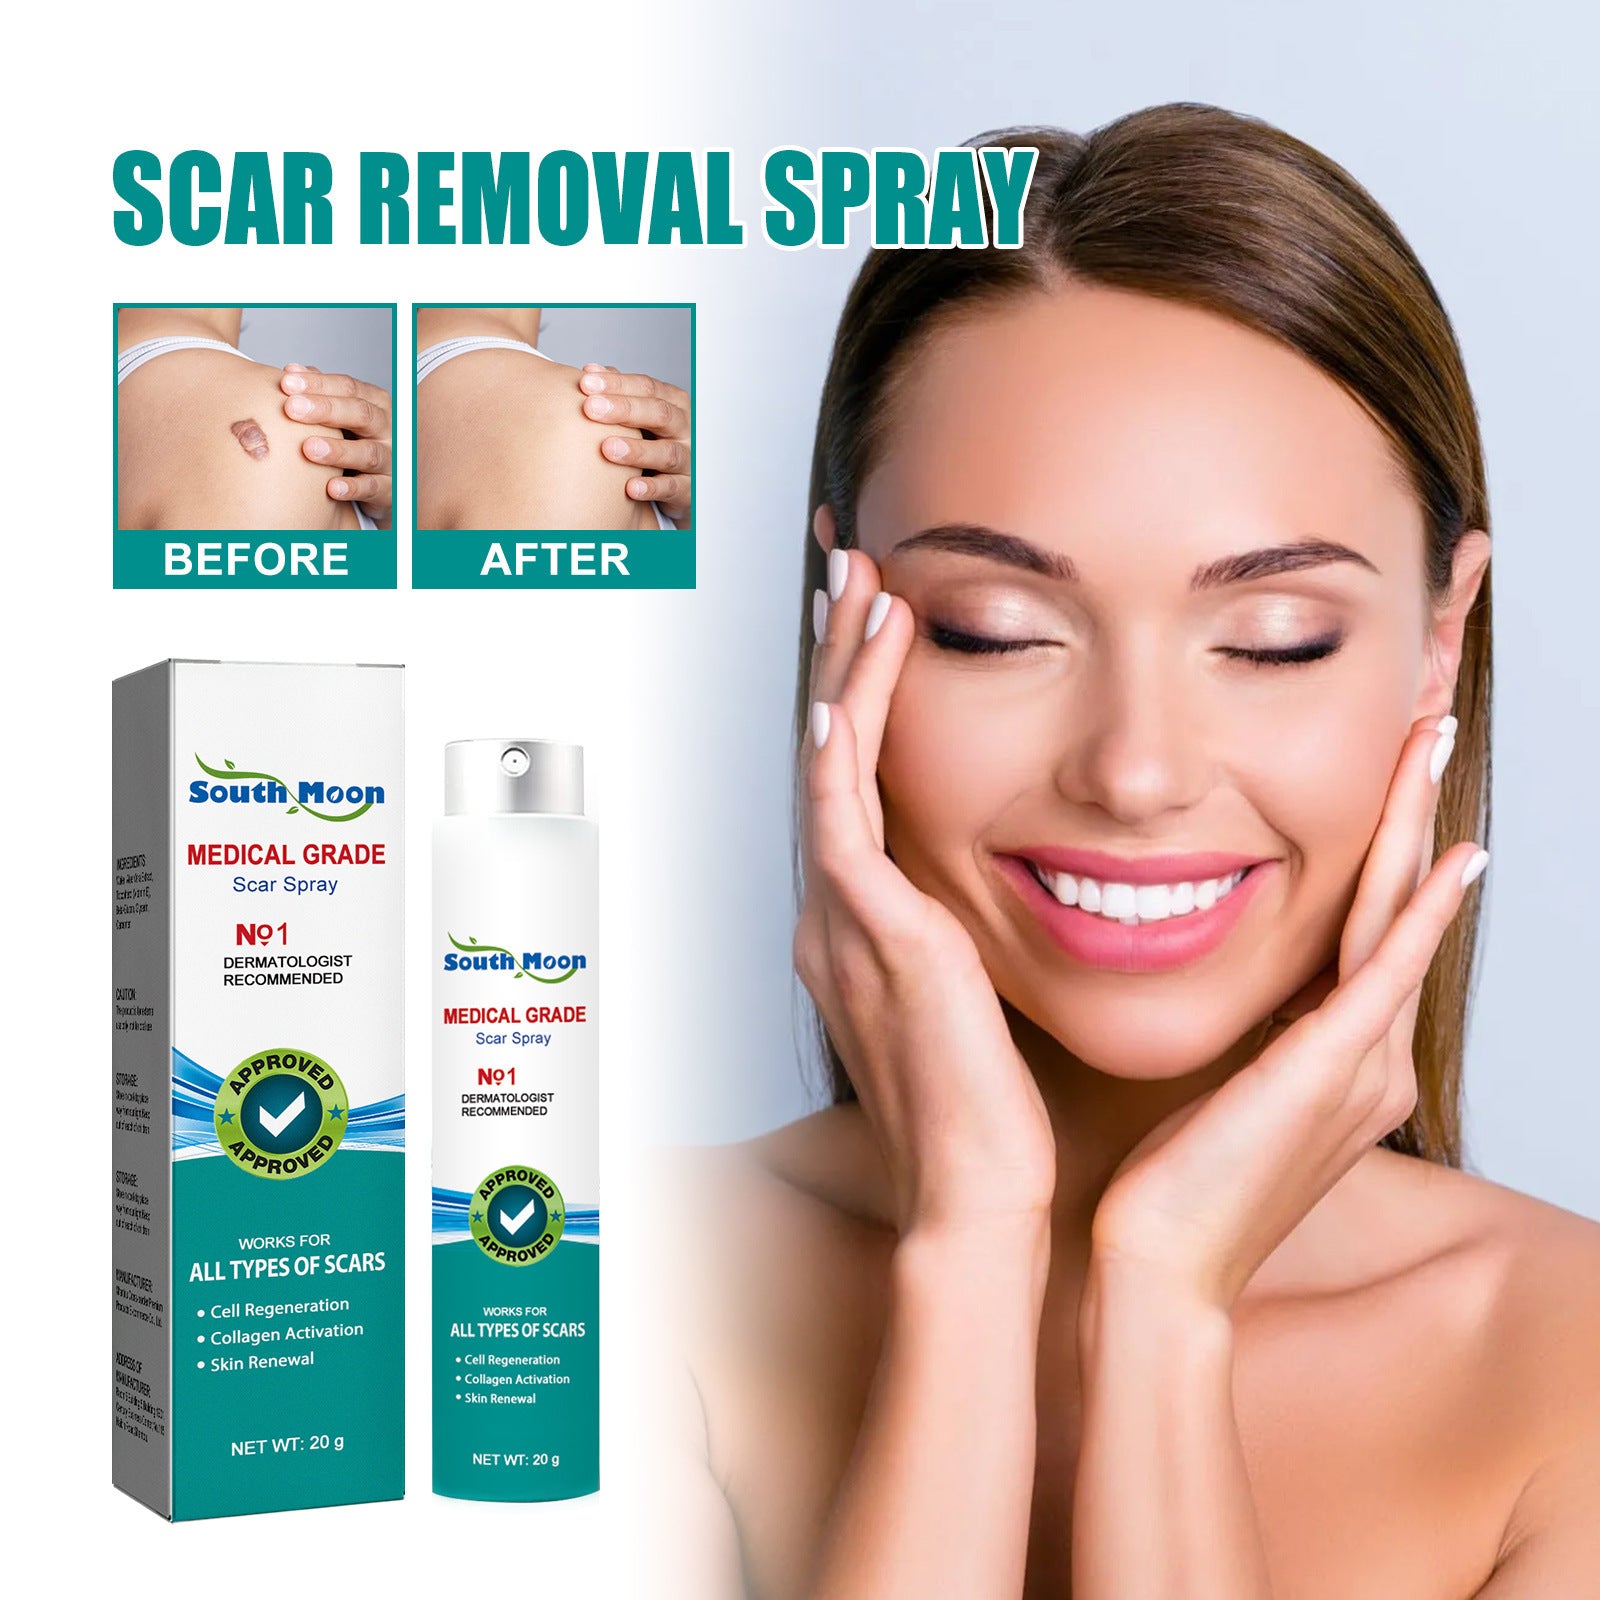 Scar removal Care Spray Lightens Scars Pregnancy and Surgery Scars Smooths Skin Care Spray